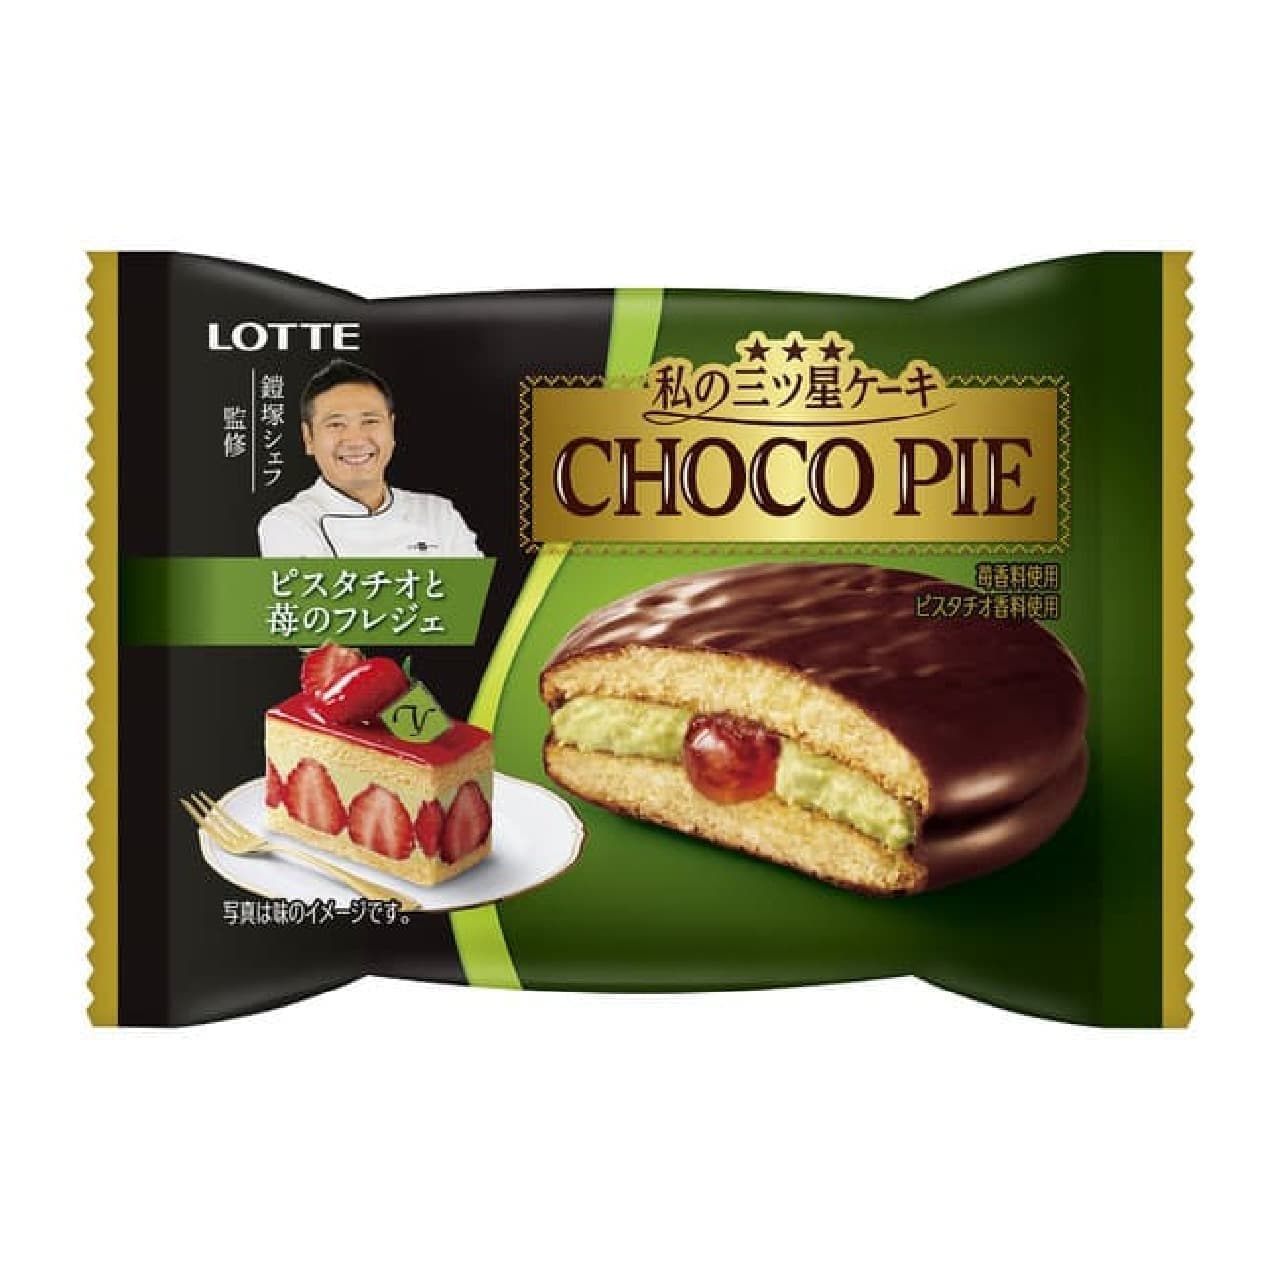 Choco pie [Pistachio and strawberry frige] sold individually